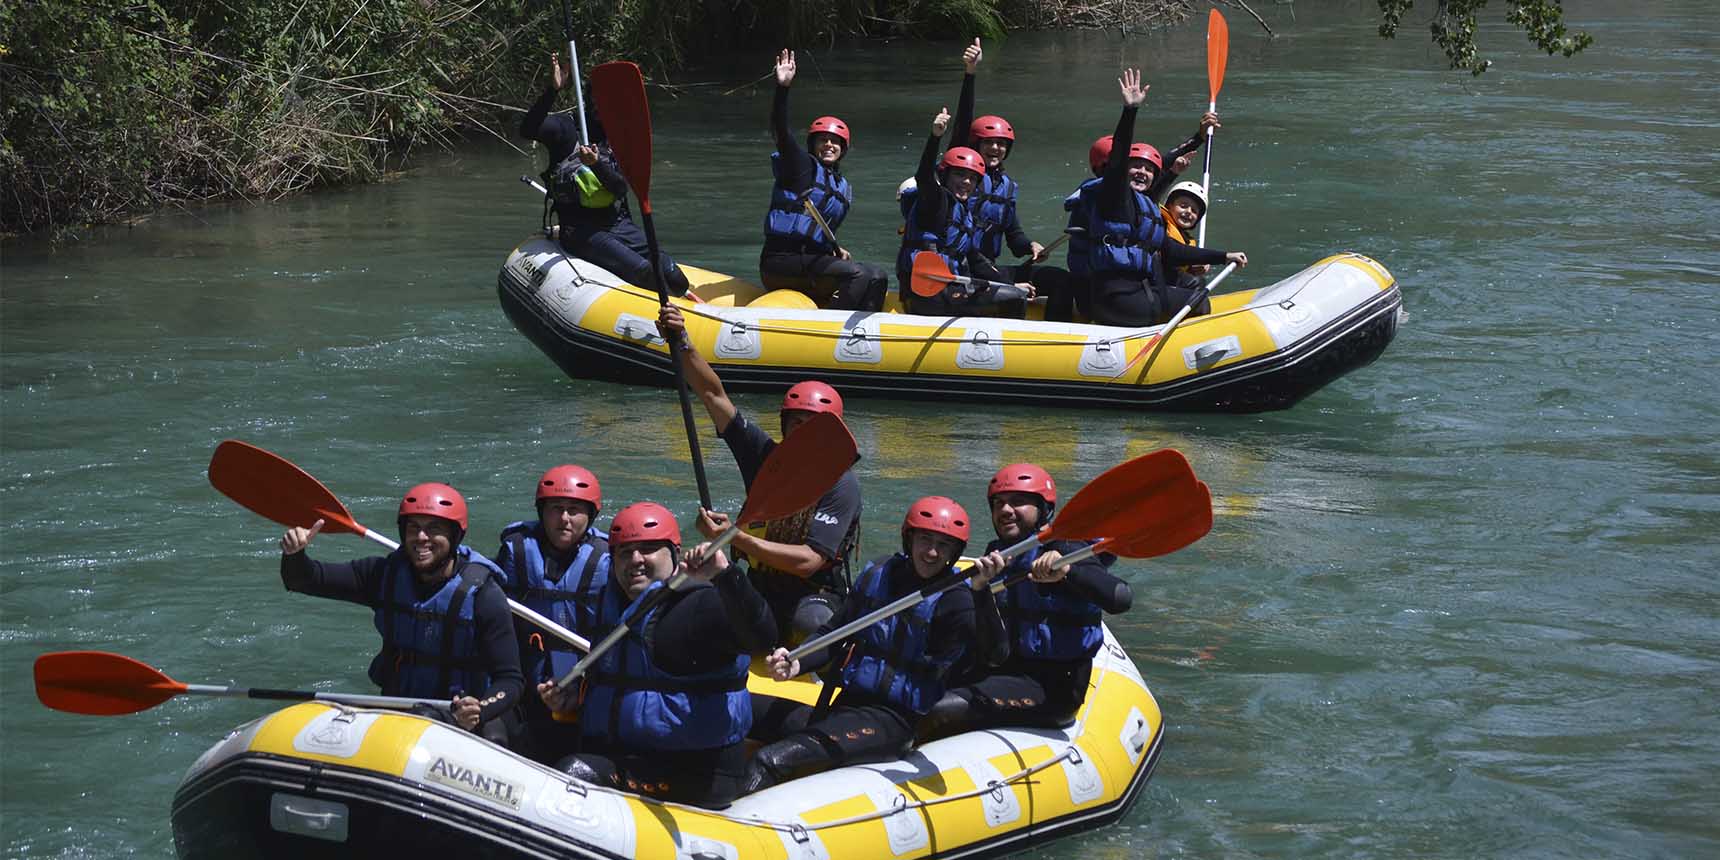 Rafting Tramo Completo low-cost